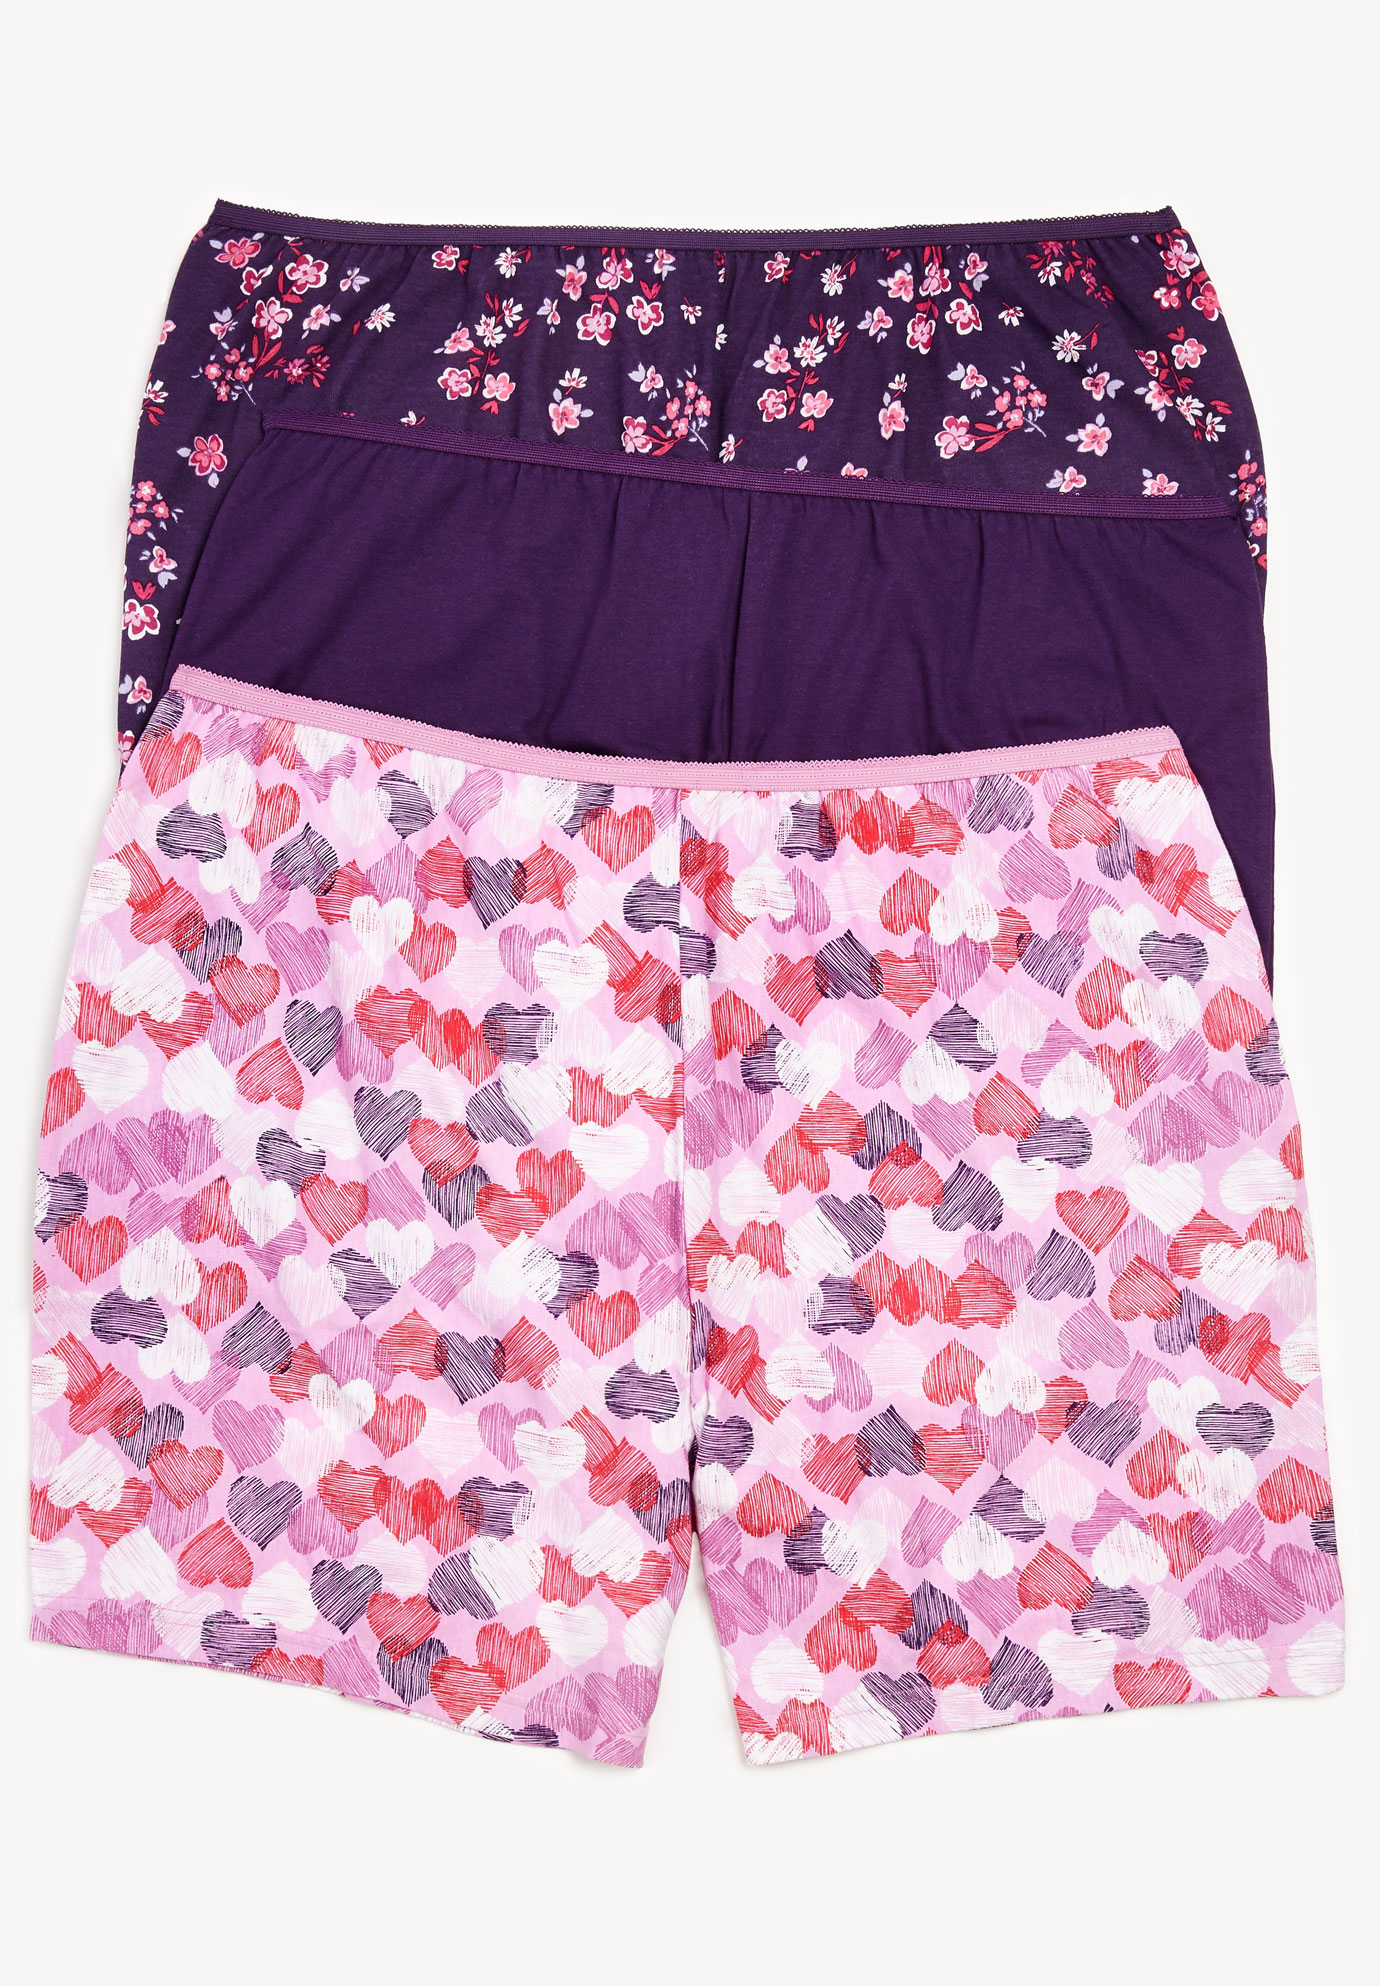 PINK floral boy shorts comfy but pretty lady's knickers choice of 3 sizes